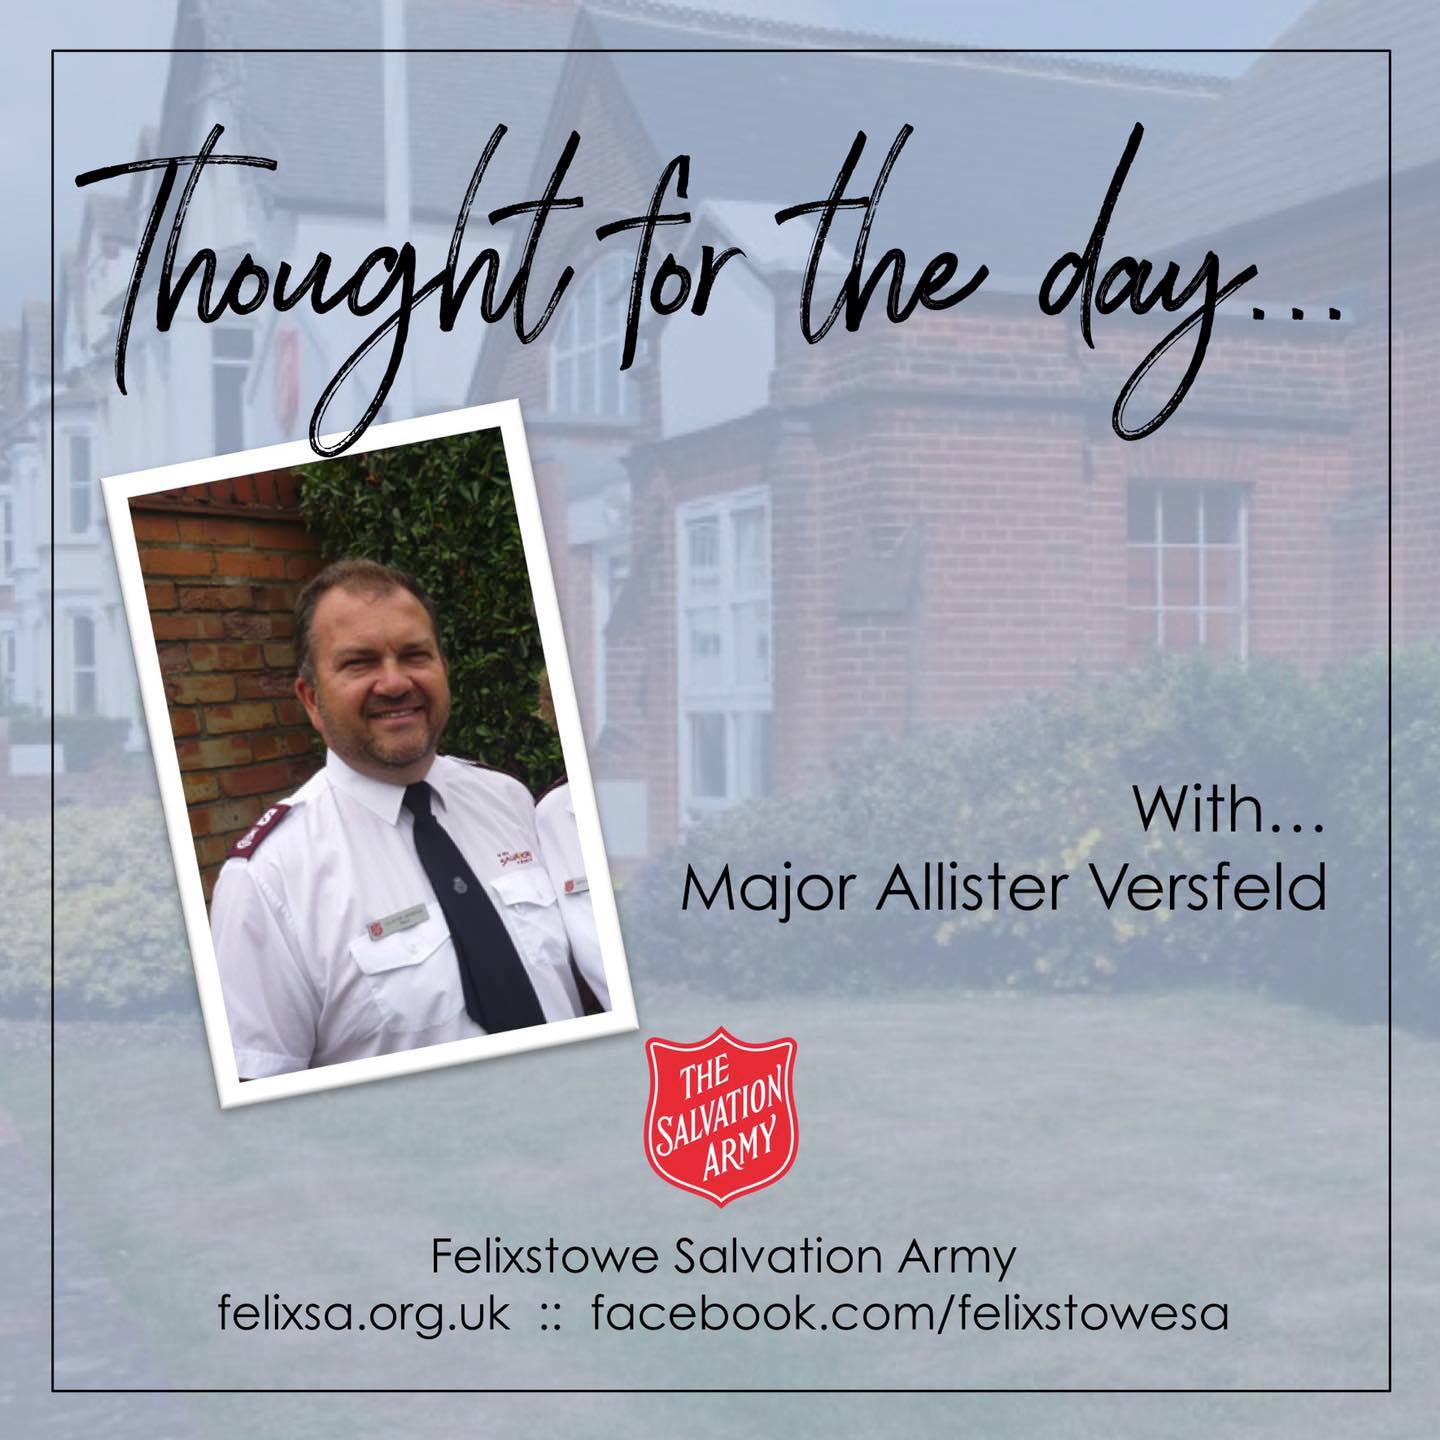 Thought for the Day with Major Allister Versfeld